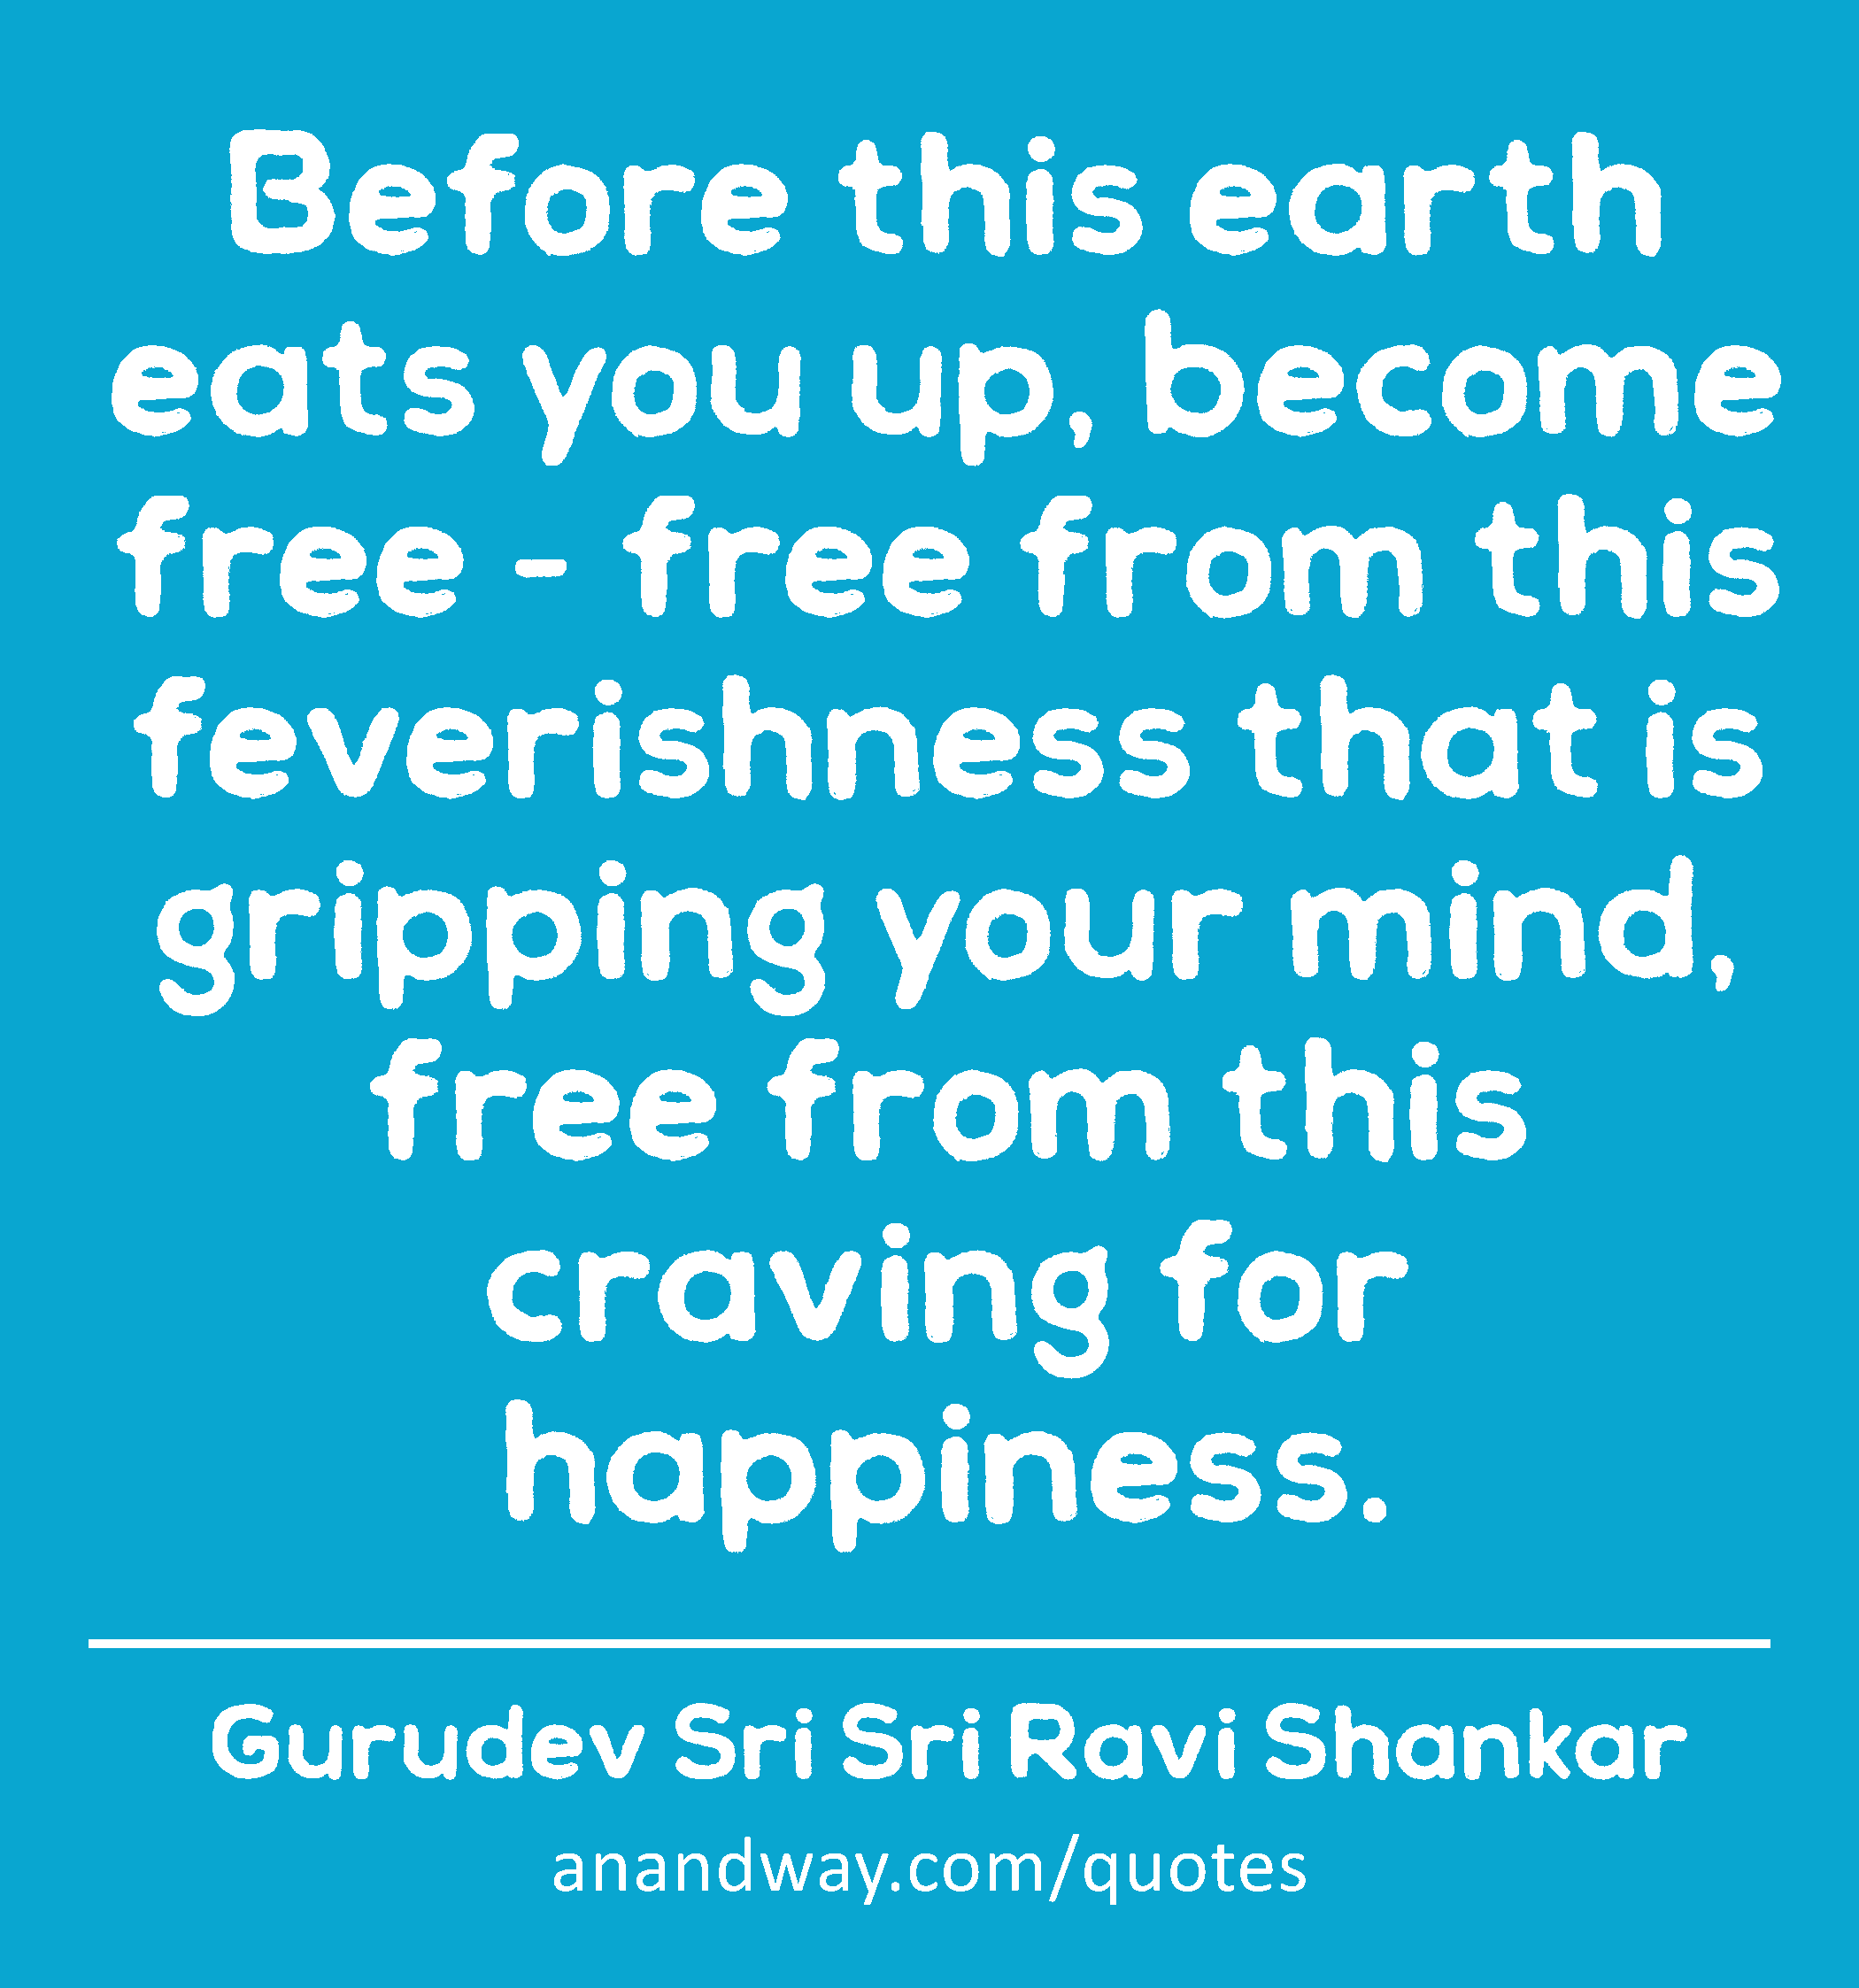 Before this earth eats you up, become free - free from this feverishness that is gripping your
 -Gurudev Sri Sri Ravi Shankar